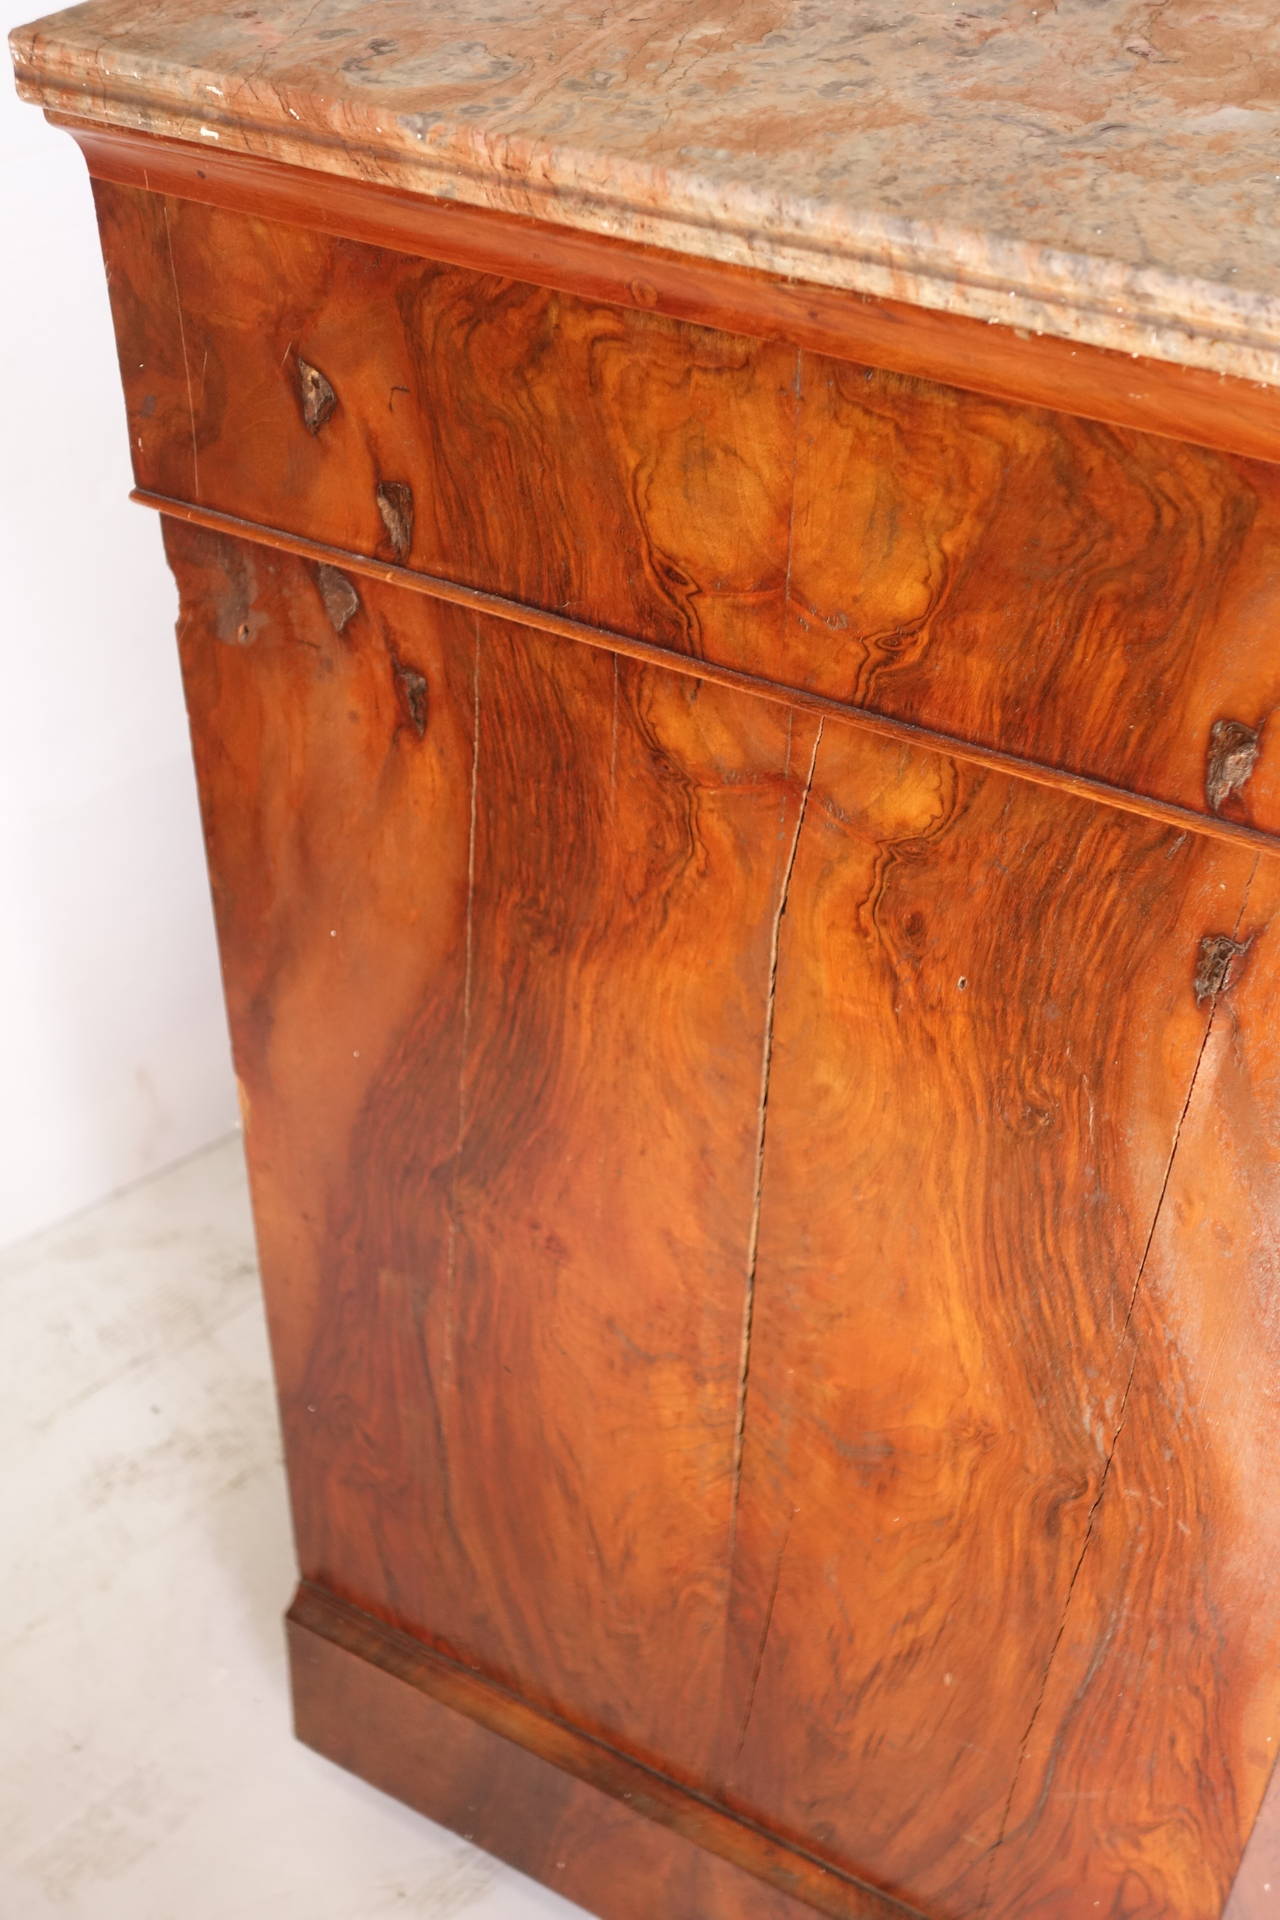 Burl walnut French Louis Philippe style dressed with original marble top.